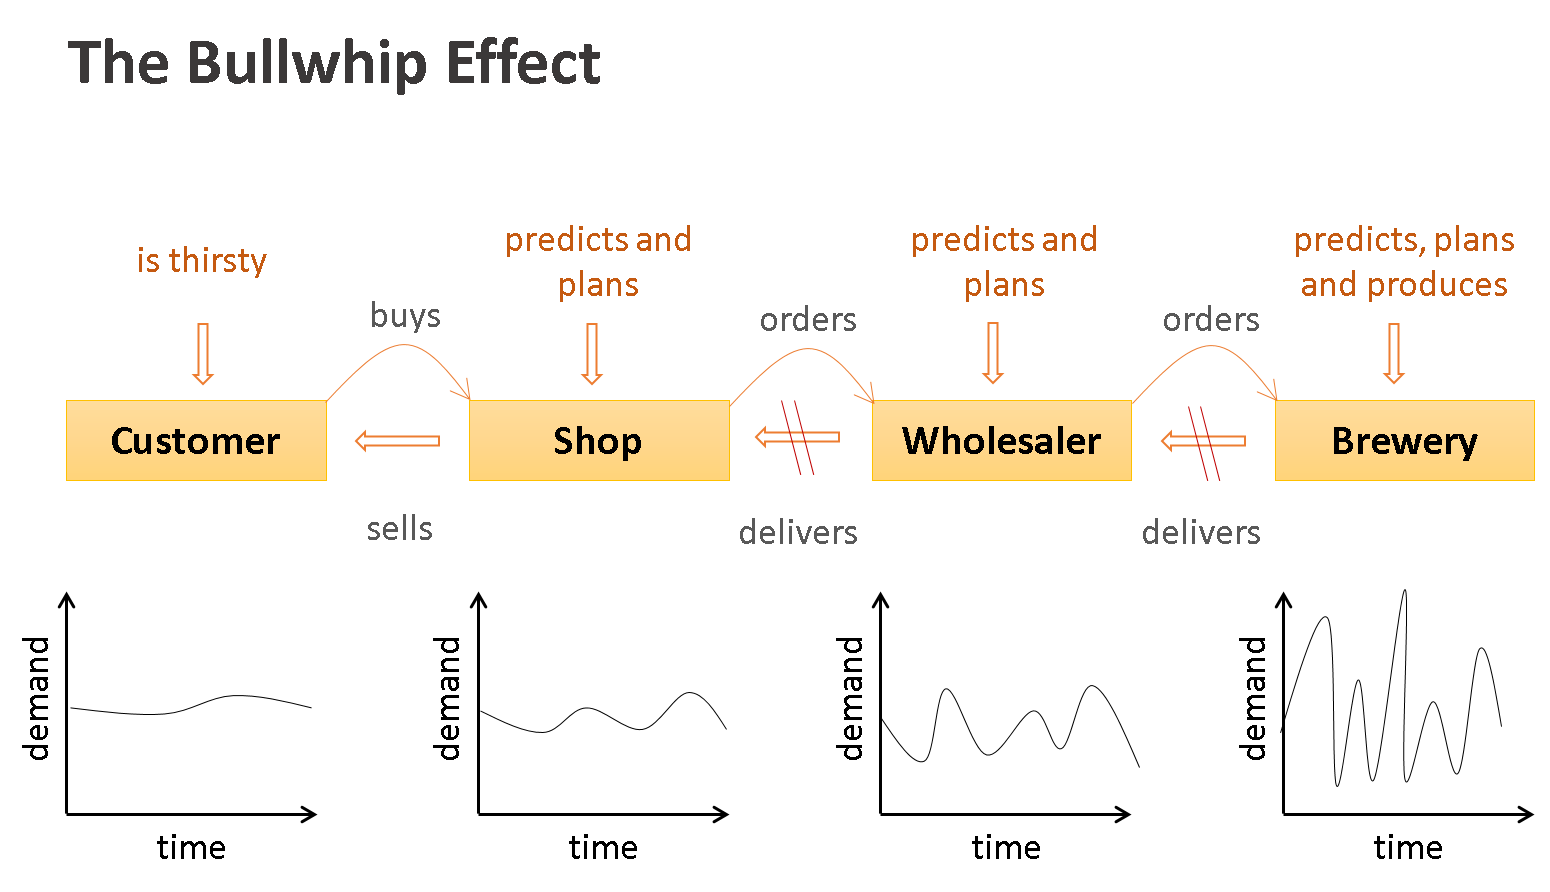 The Bullwhip Effect in production demands is an implication of delayed feedback in a supply chain.